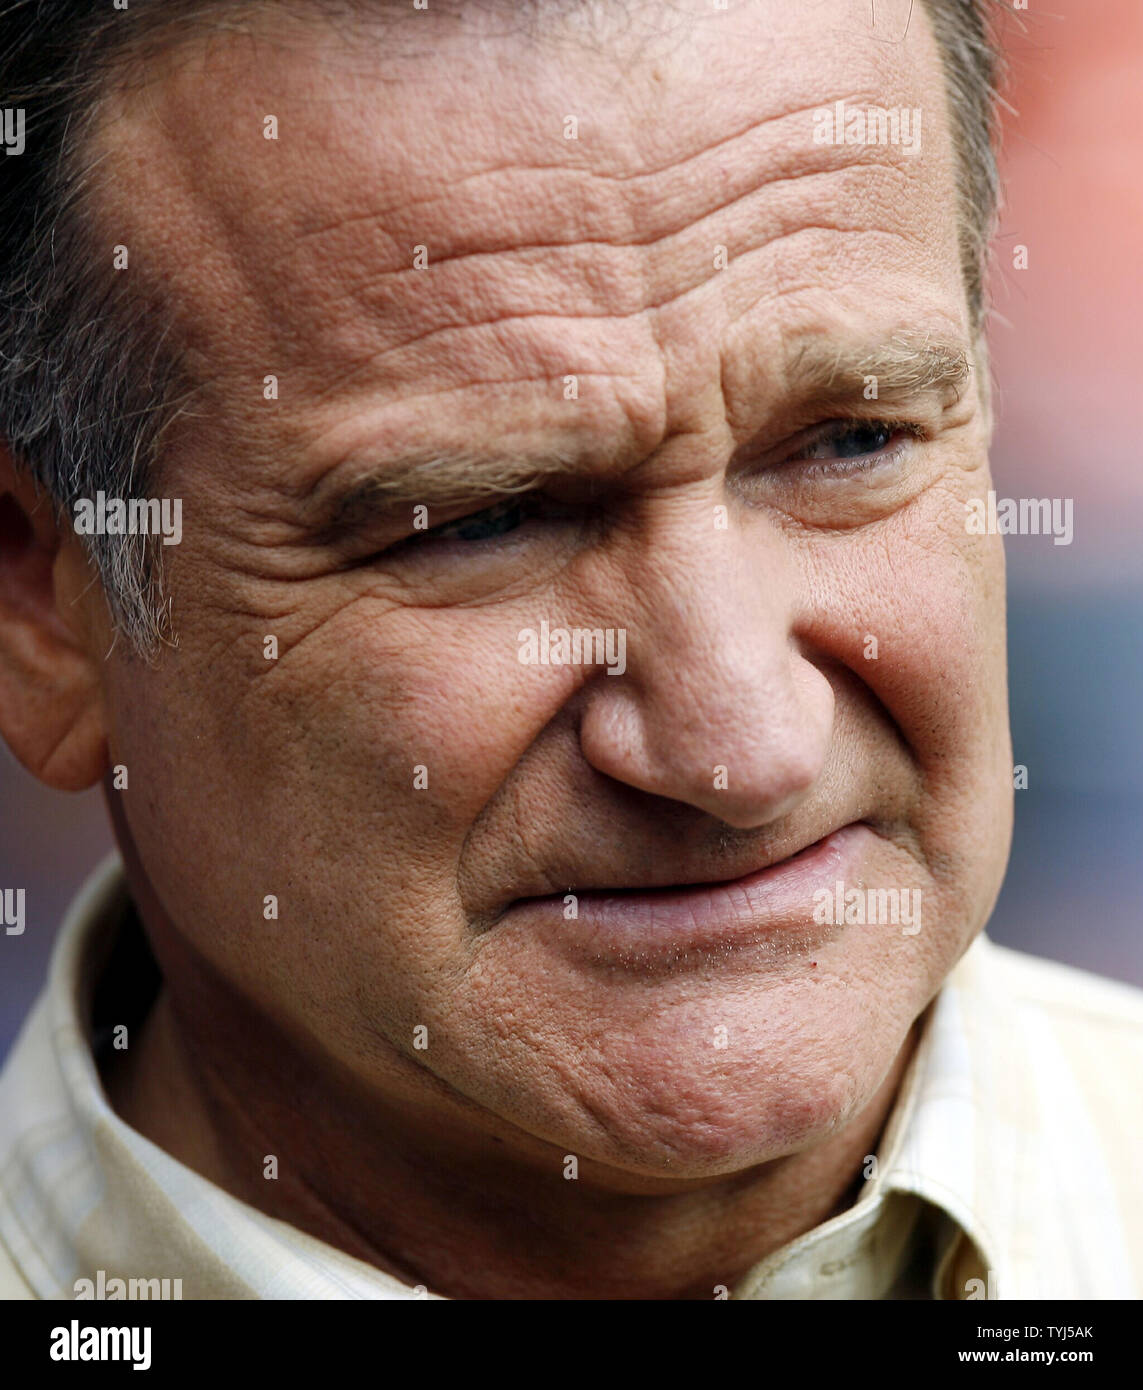 Robin Williams, seen in a file photo on the set while shooting the movie "Old Dogs" at Shea Stadium in New York City on July 26, 2007, died in Marin County, California on August 11, 2014. He was 63.     UPI/John Angelillo Stock Photo